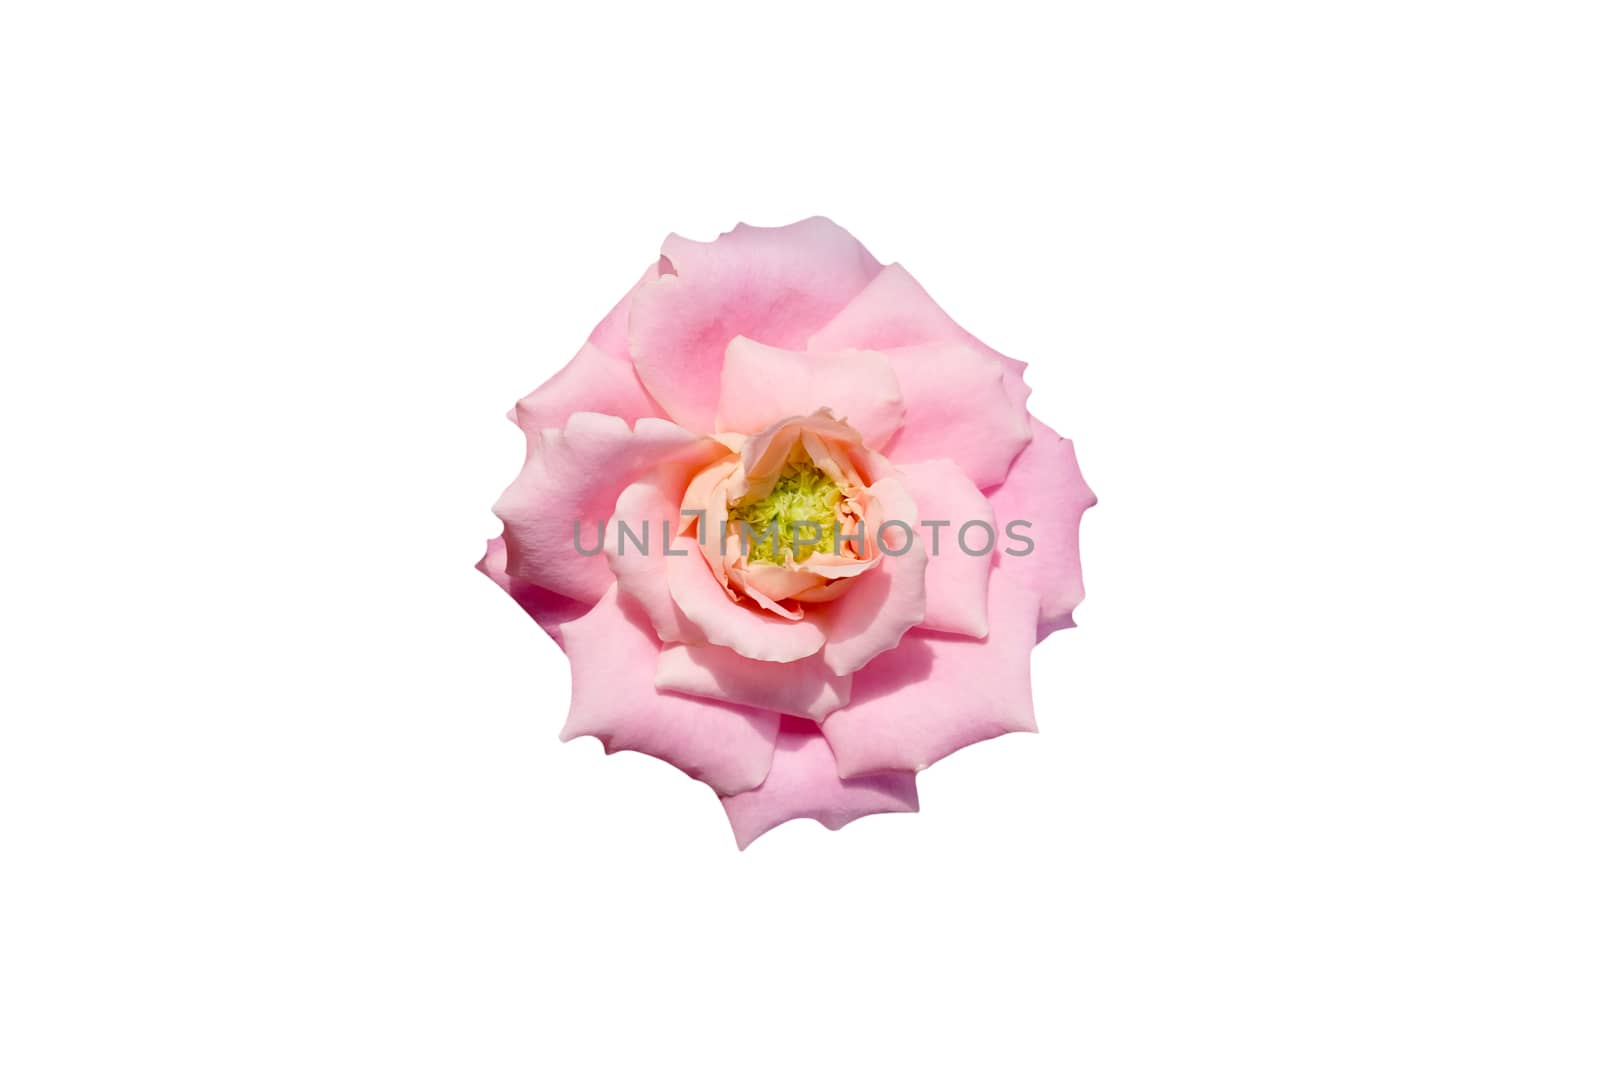 Pink rose flower isolated with clipping mask on white background by Macrostud